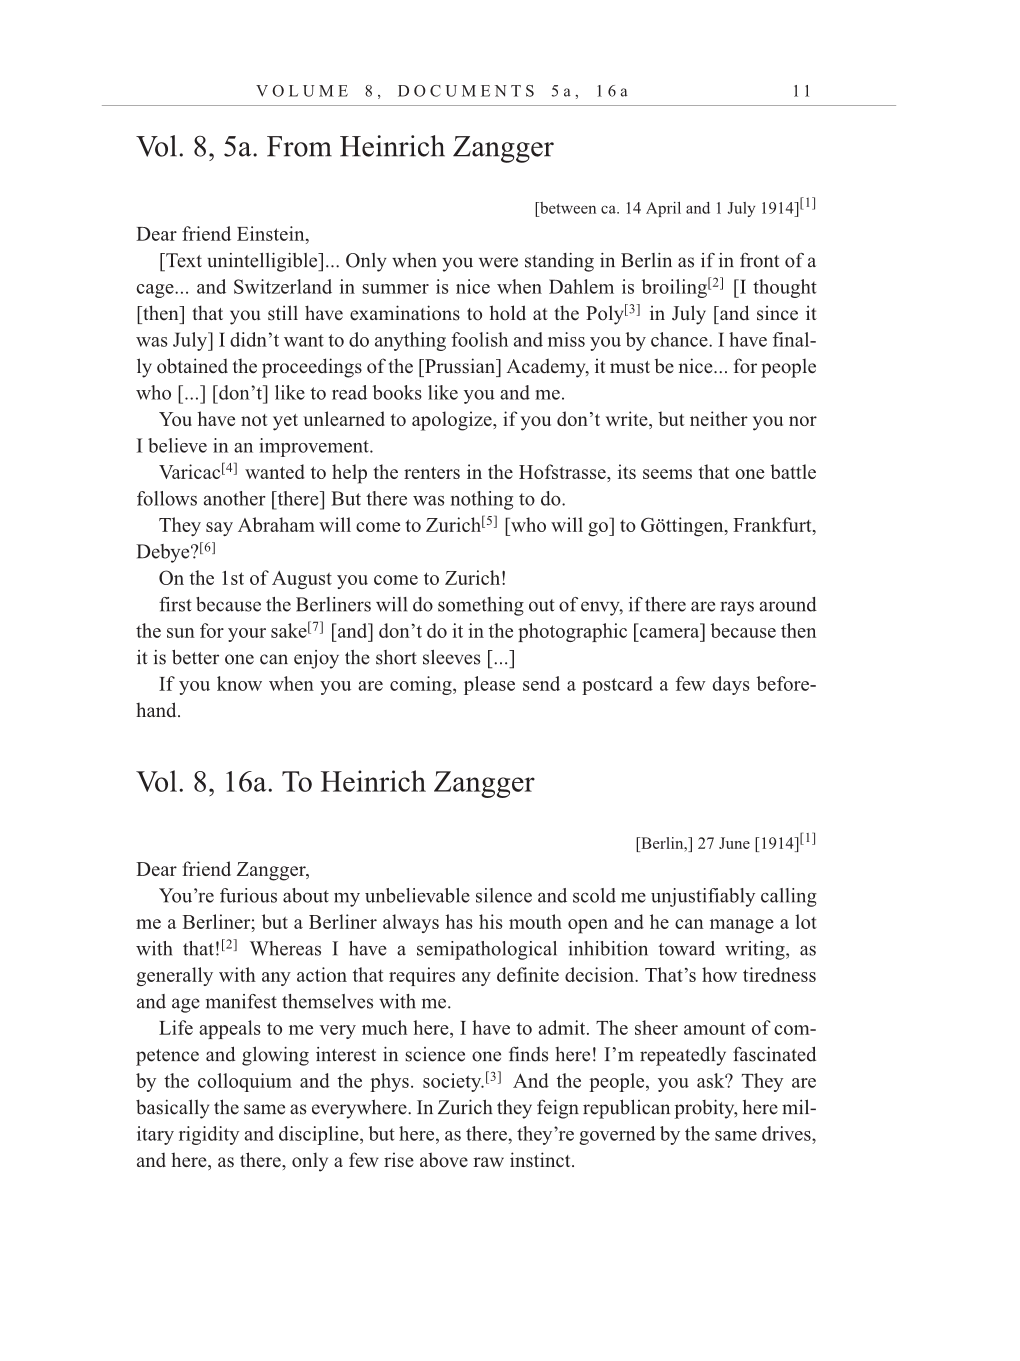 Volume 10: The Berlin Years: Correspondence, May-December 1920, and Supplementary Correspondence, 1909-1920 (English translation supplement) page 11